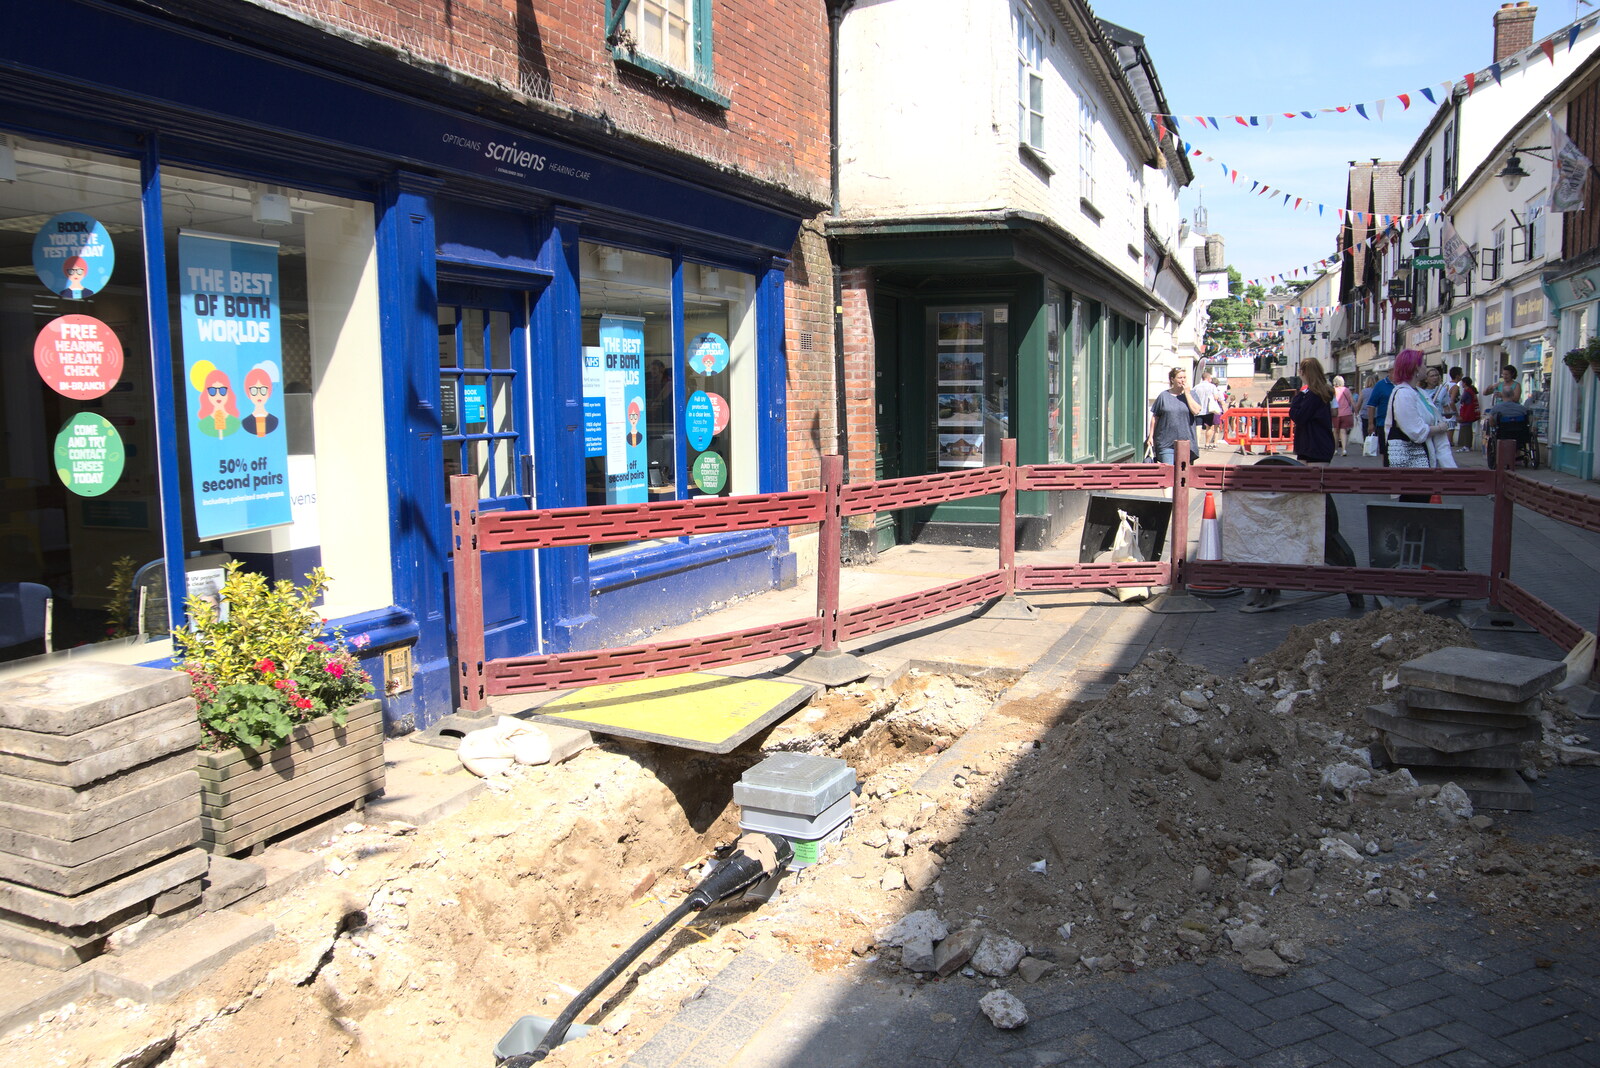 A July Miscellany, Diss, Eye and Norwich - 23rd July 2022: There's a big hole in Mere Street